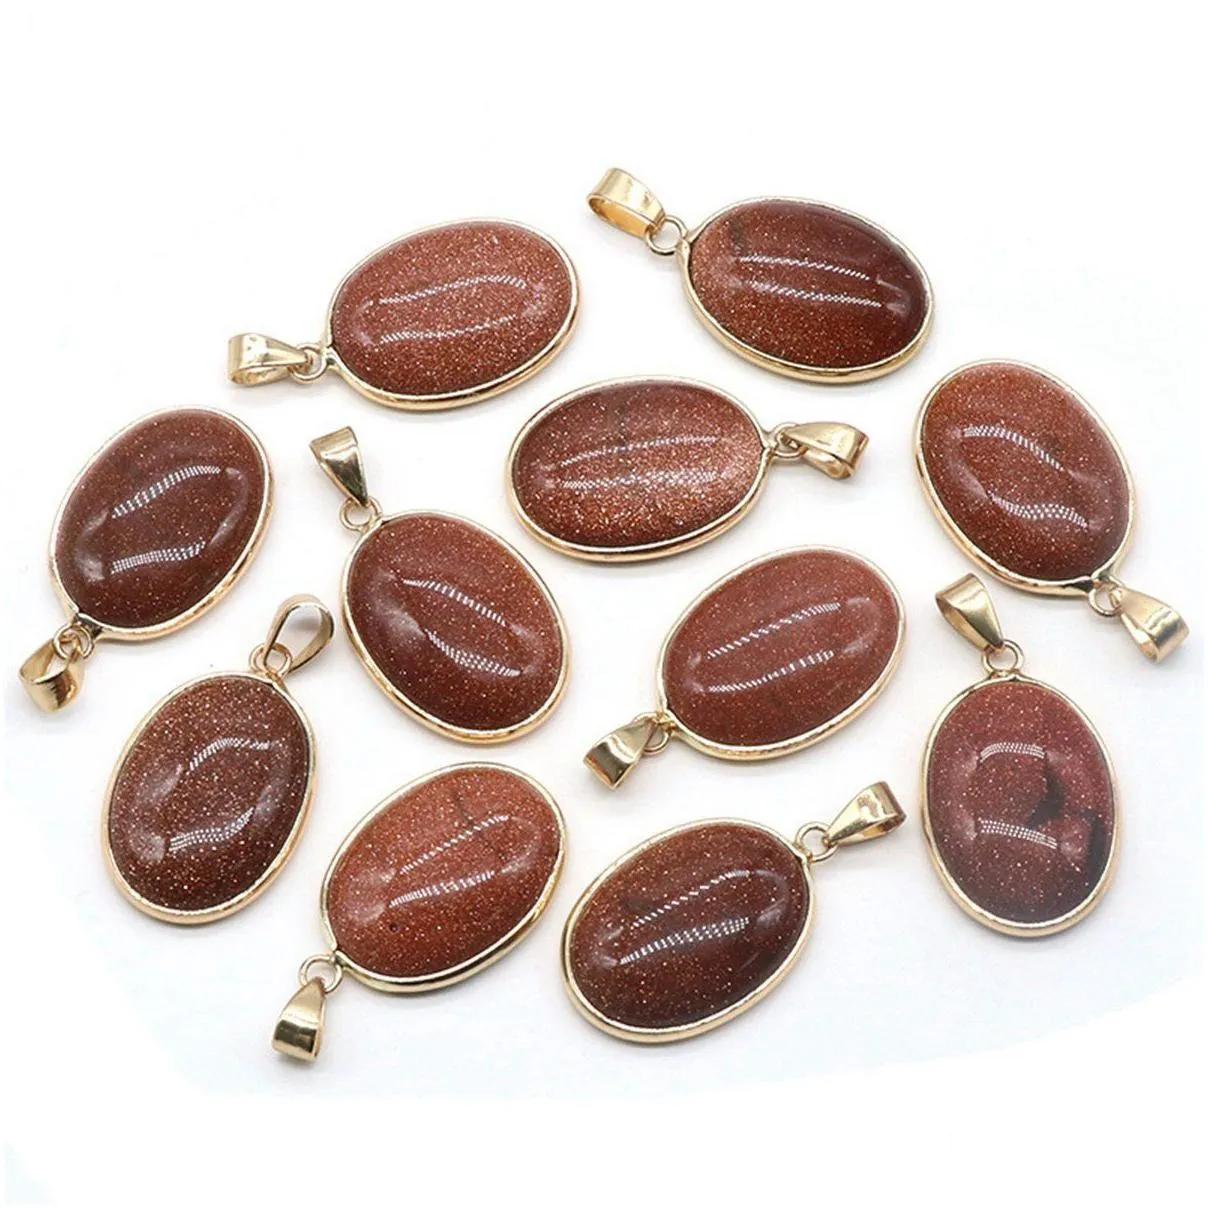 18x25mm Natural Blue Goldstone Stone Irregular Waterdrop Shape Exquisite Quartz Agate Charms for Jewelry Making Necklace Bracelet